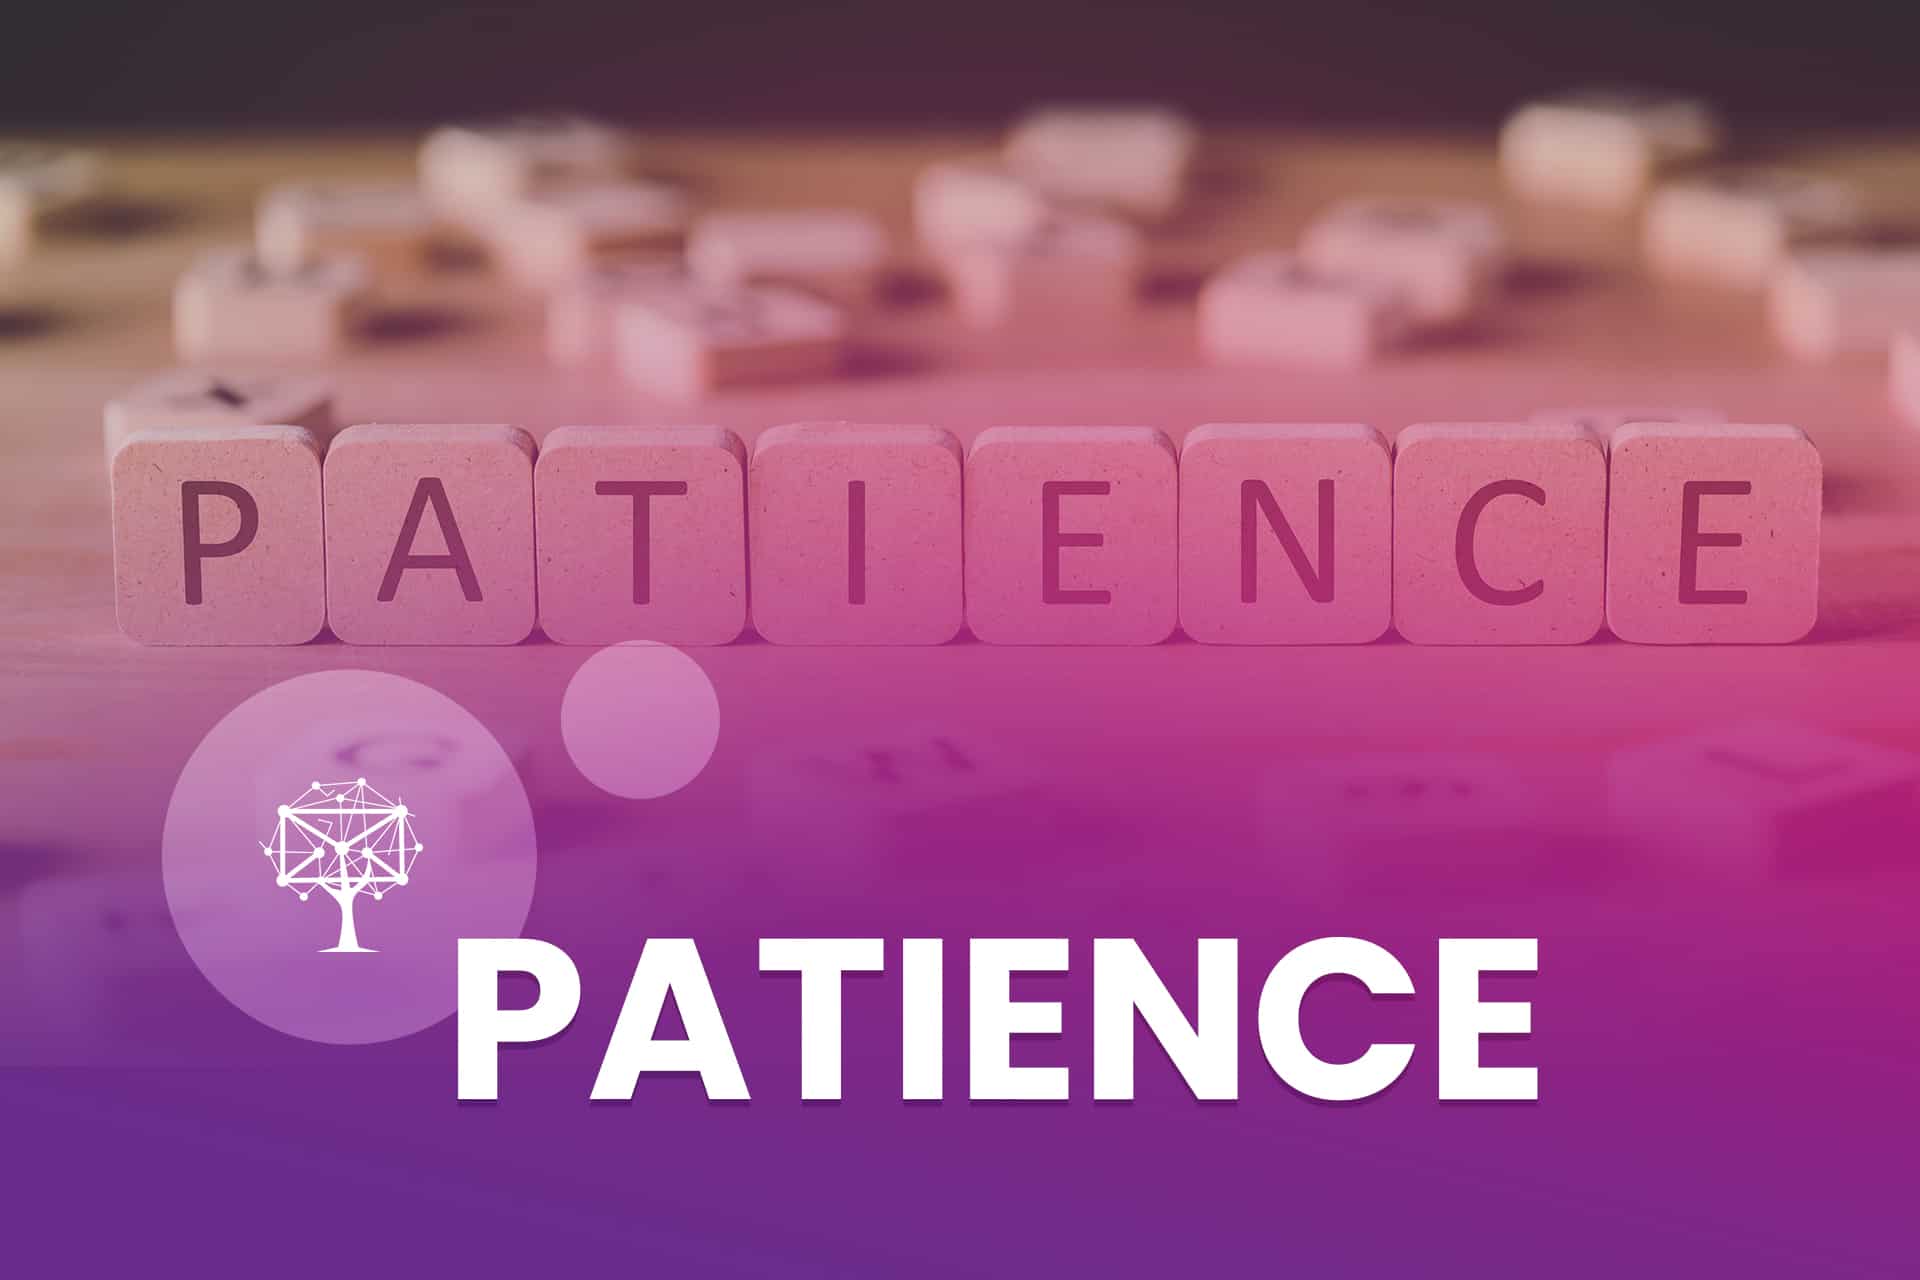 To be successful in customer service, patience is essential